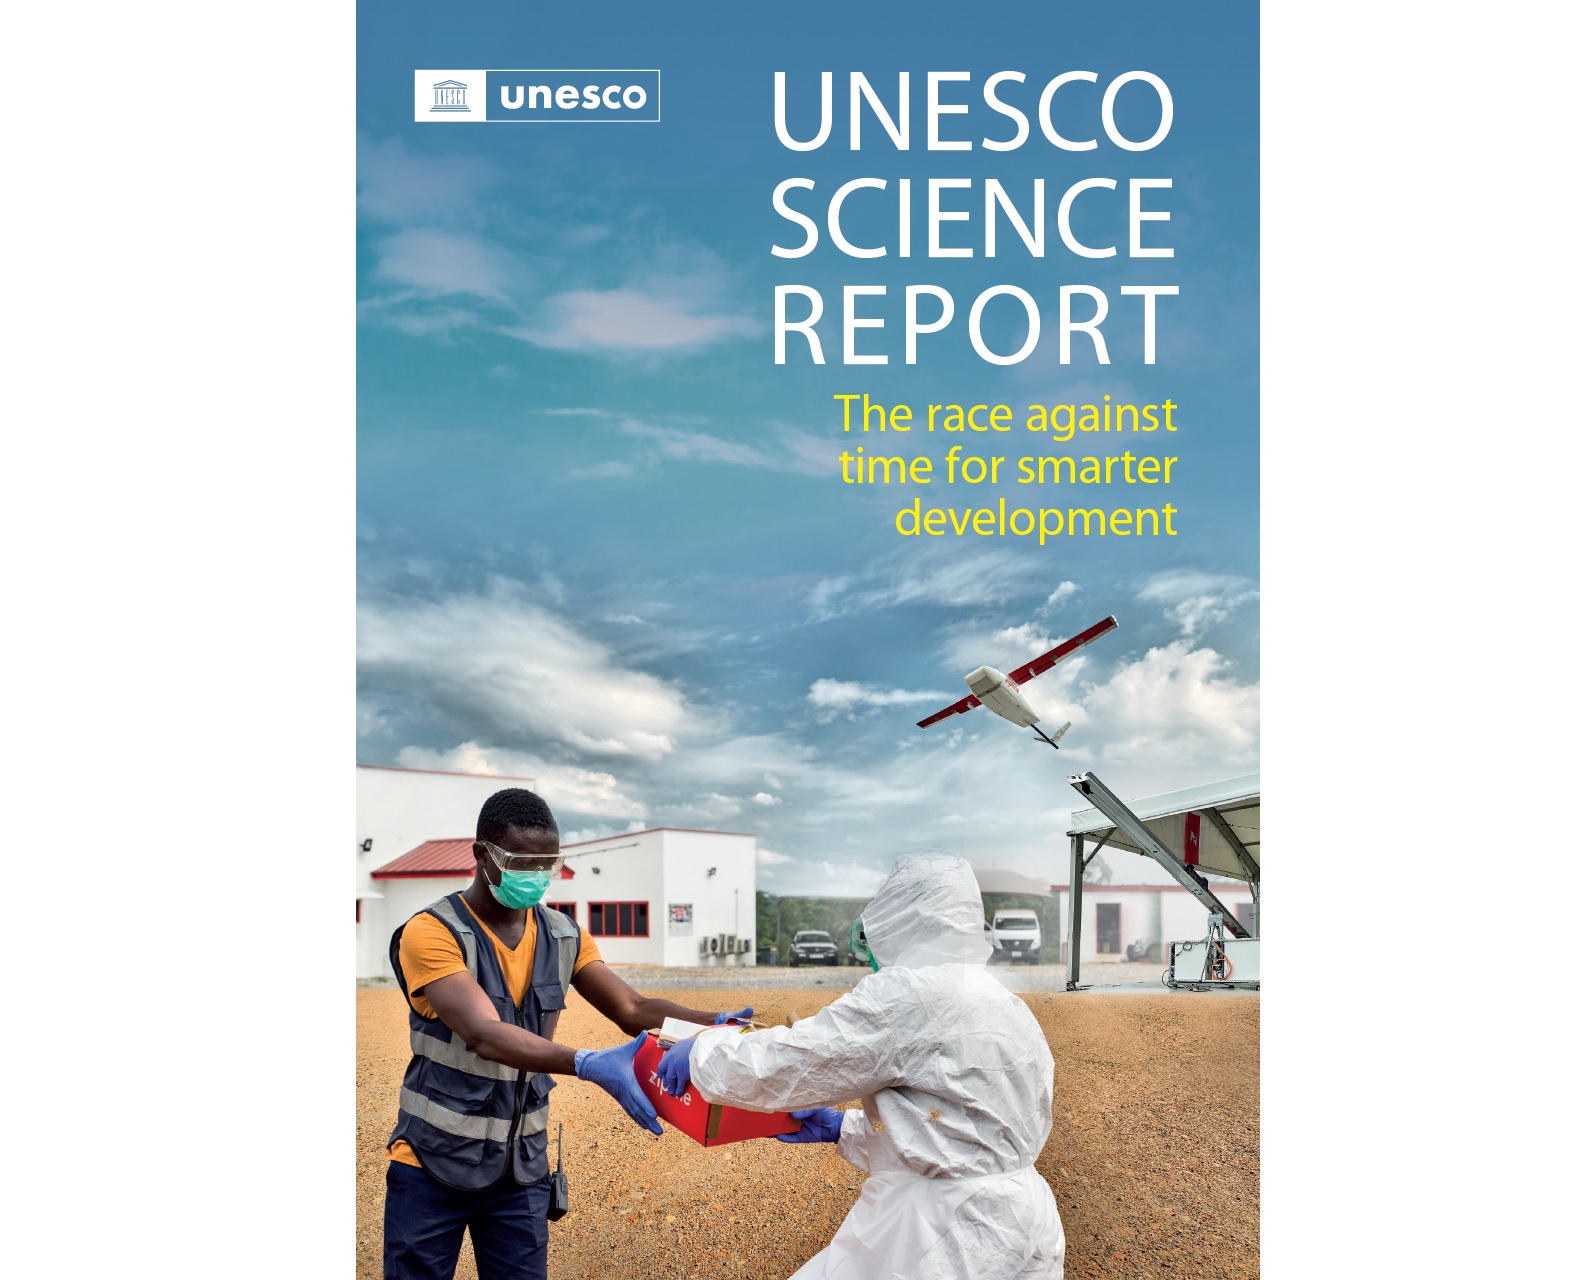 Spending on R&D will determine India’s future progress, key message of the latest UNESCO Science Report